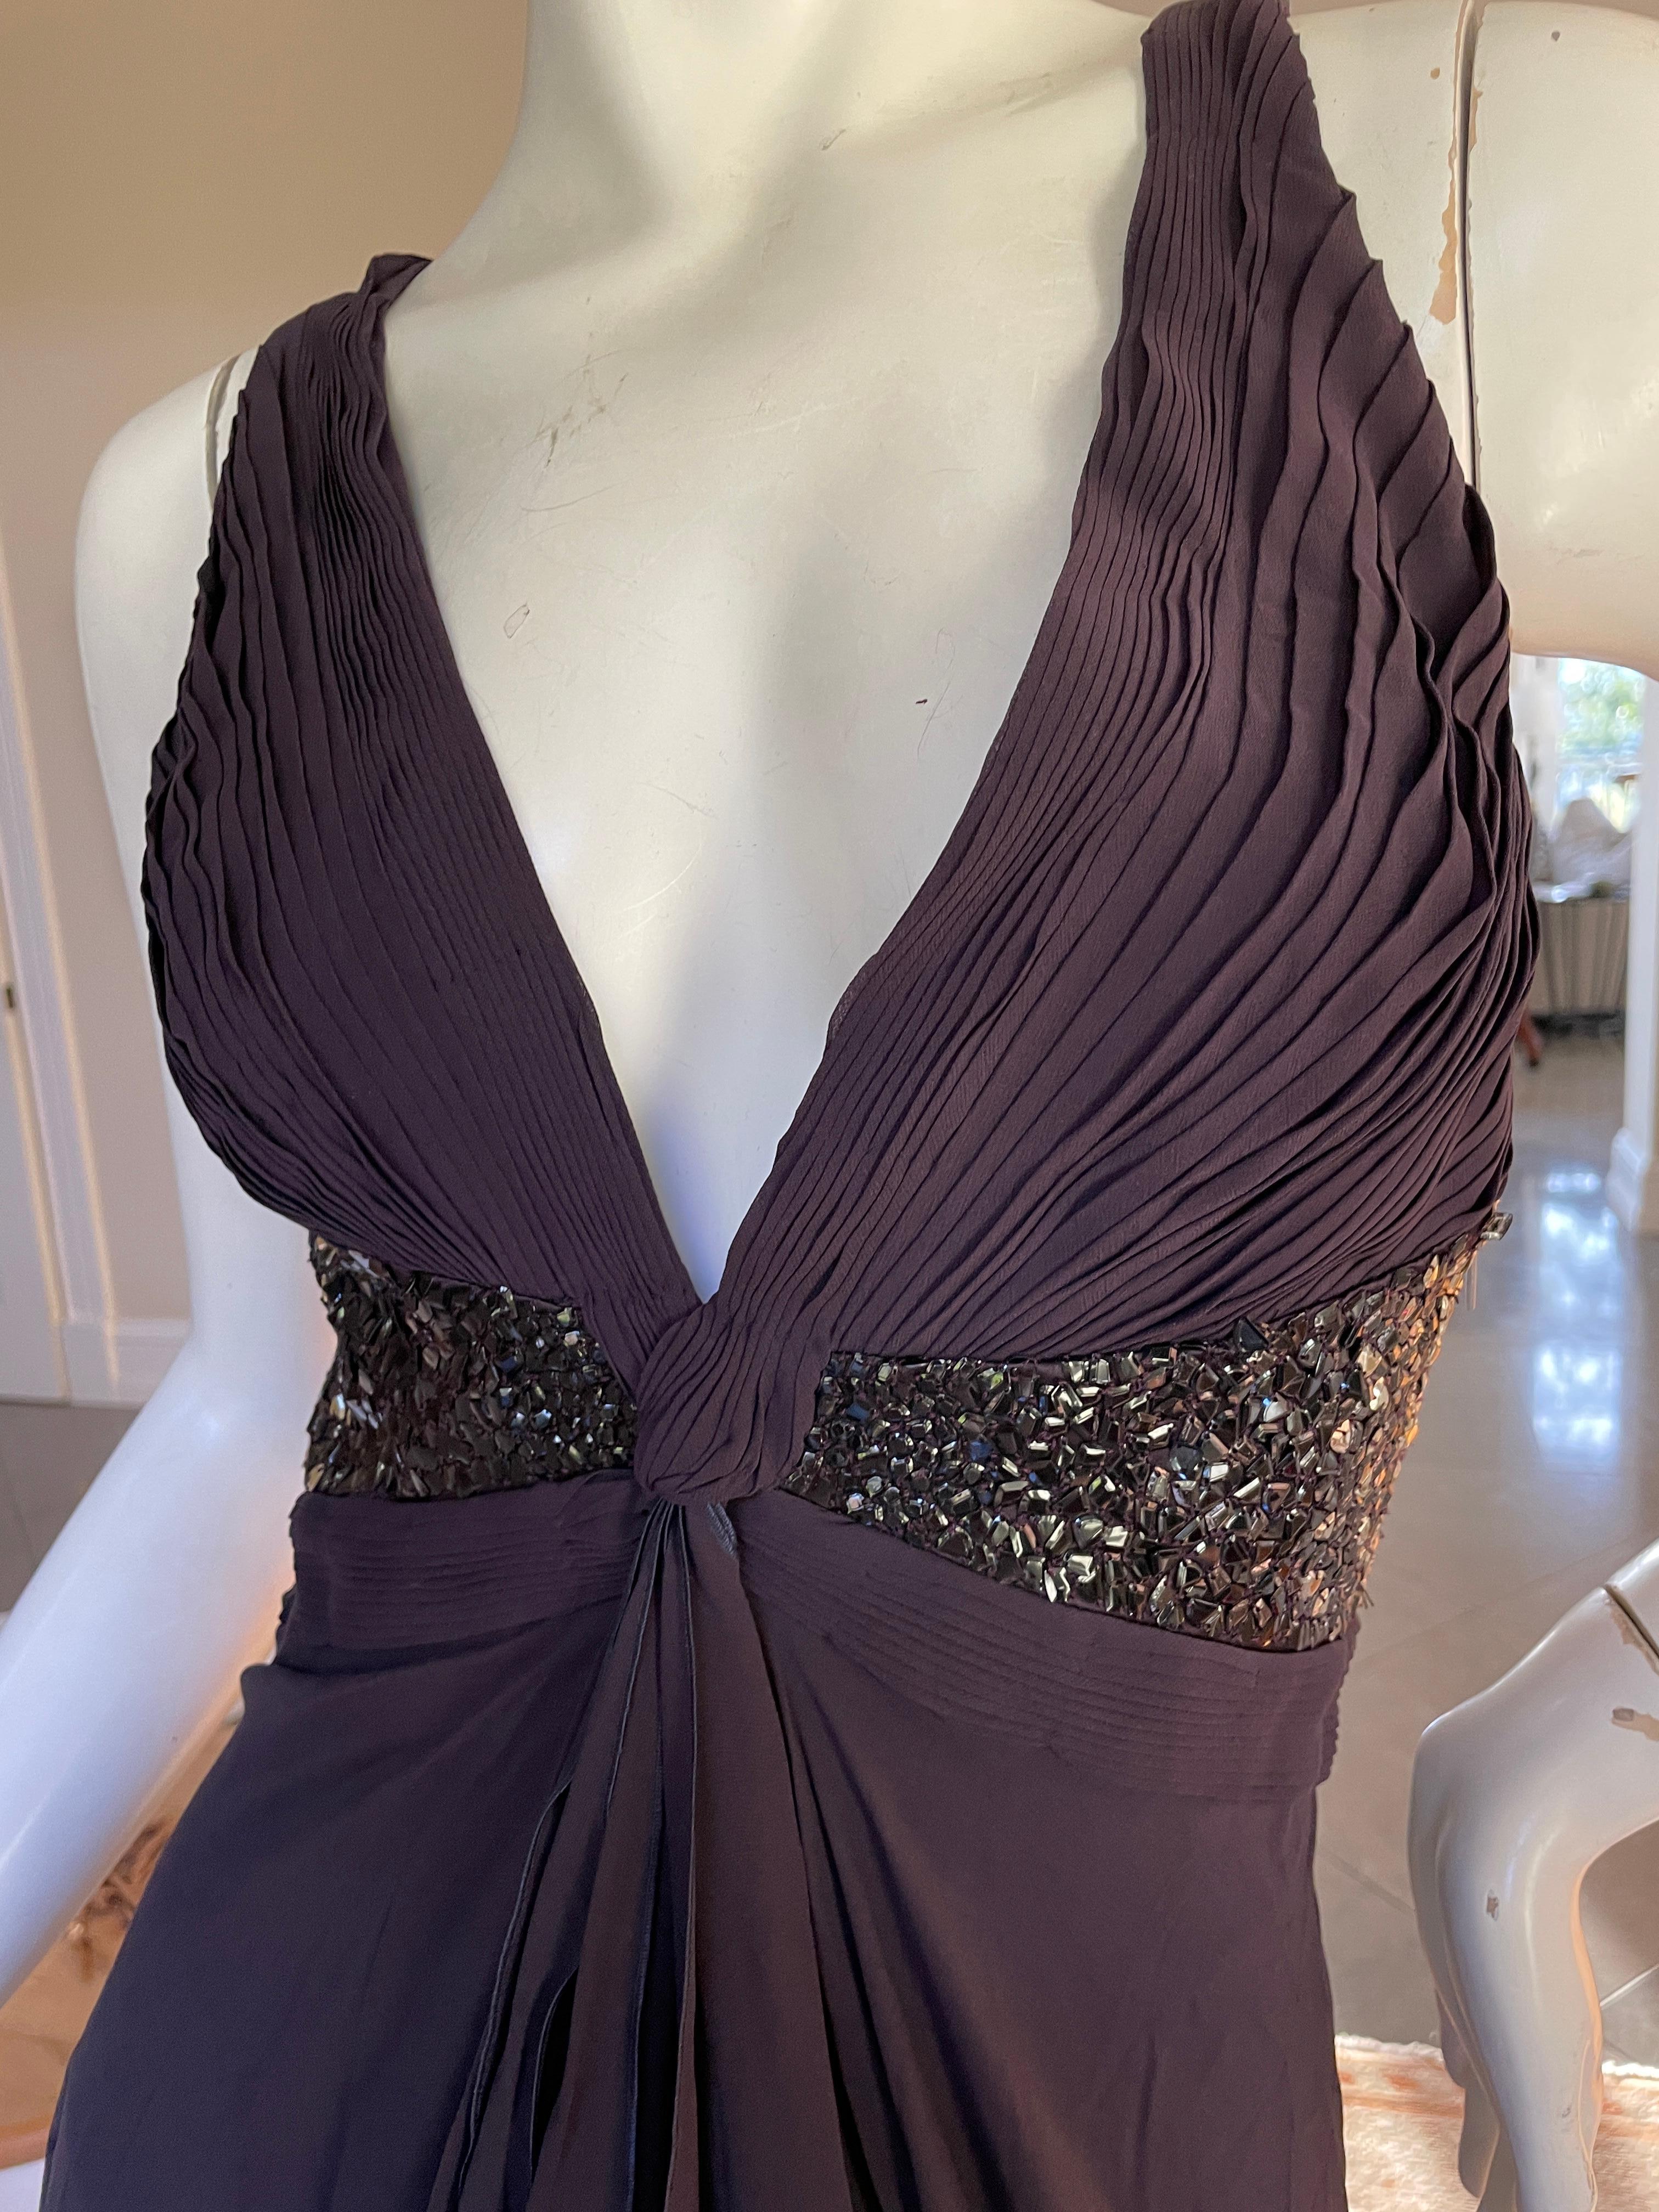 Women's Roberto Cavalli Vintage Ombre Sequin Purple Plunging Dress with Sexy Back For Sale